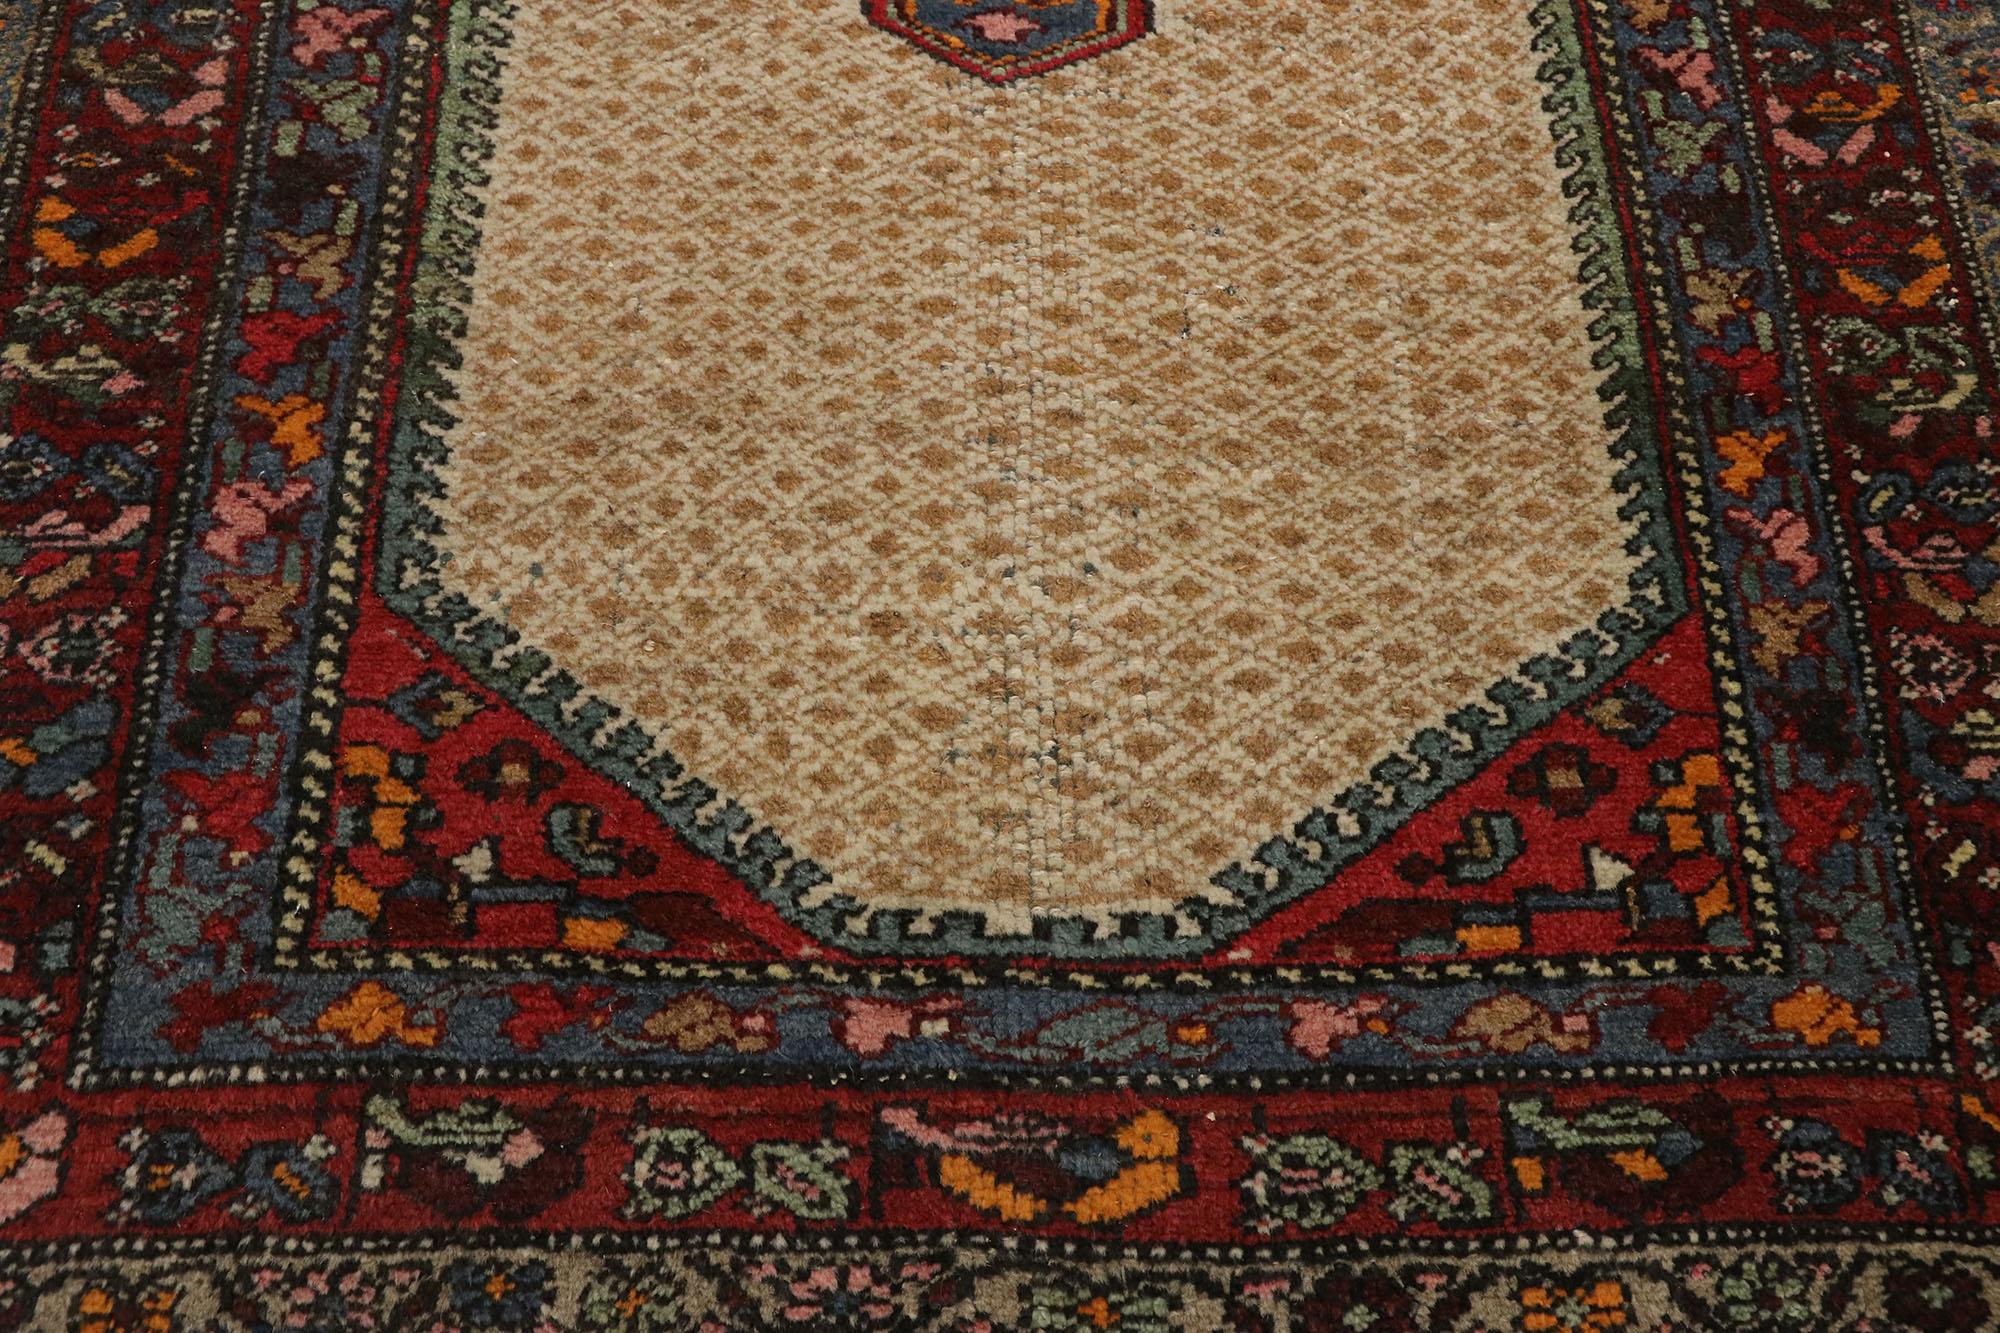 Antique Persian Hamadan Rug with Arts & Crafts Style In Good Condition For Sale In Dallas, TX